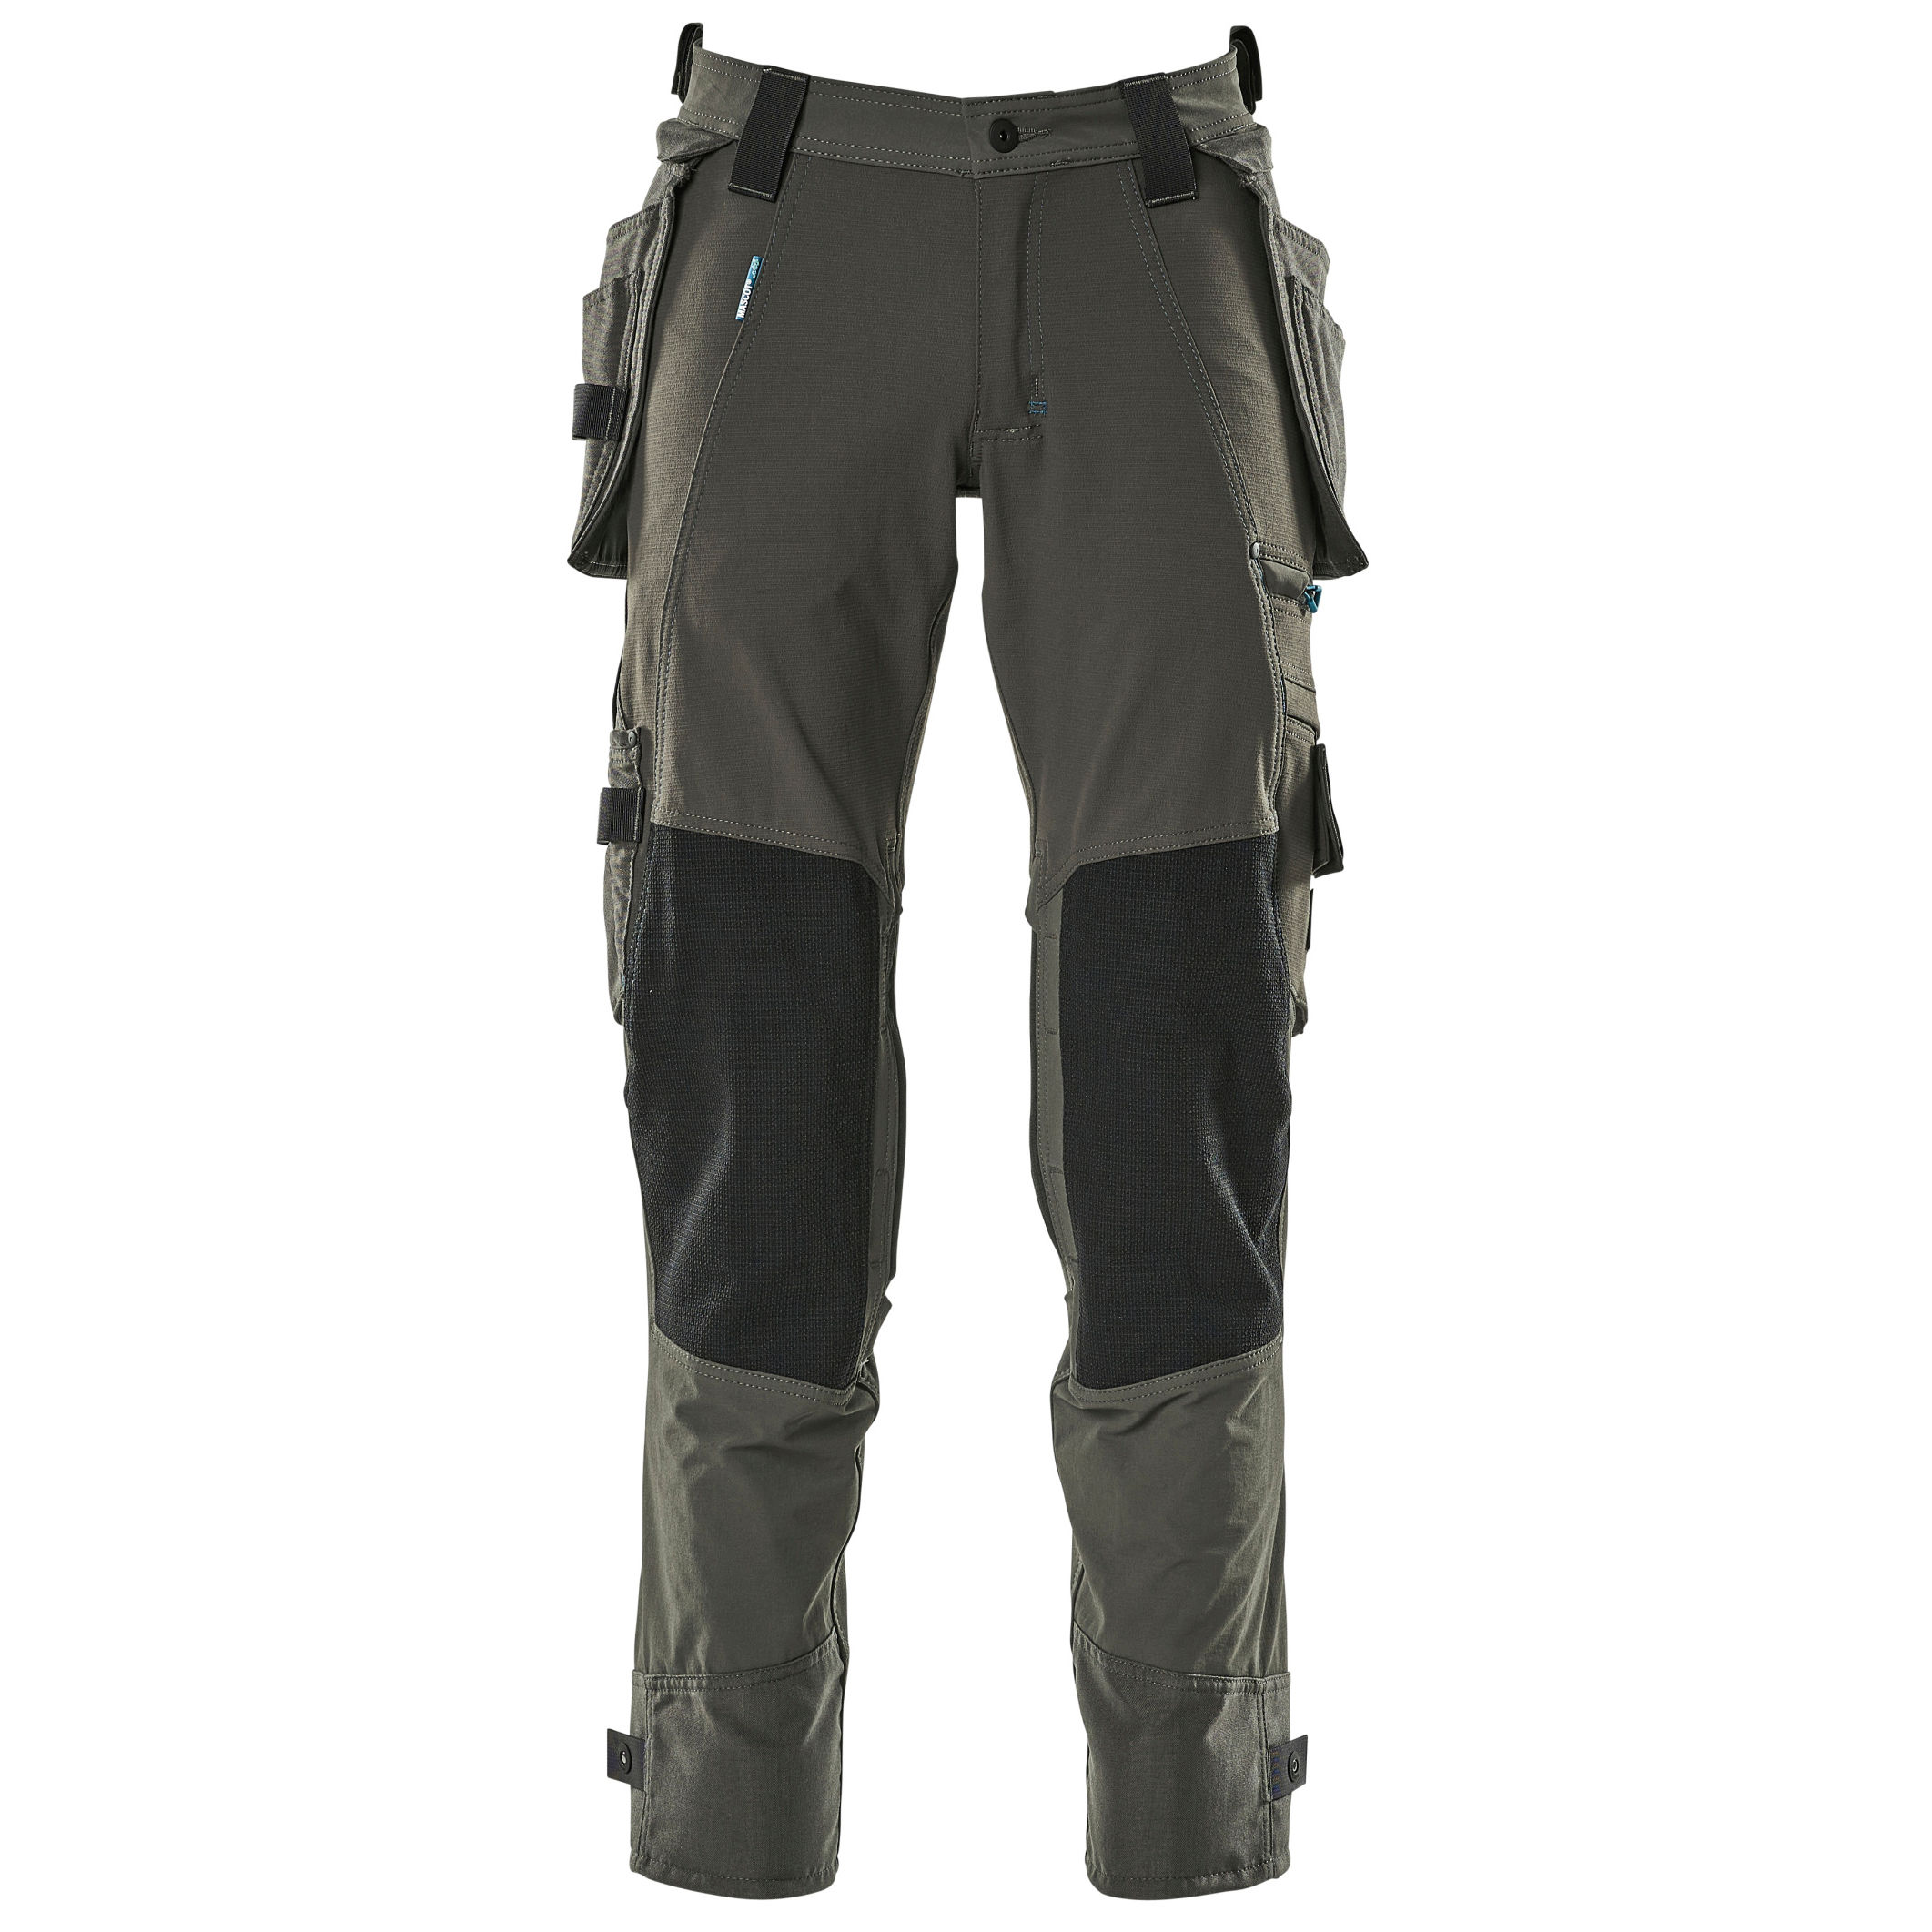 Mascot Advanced Work Trousers With Holster Pockets - Dark Anthracite